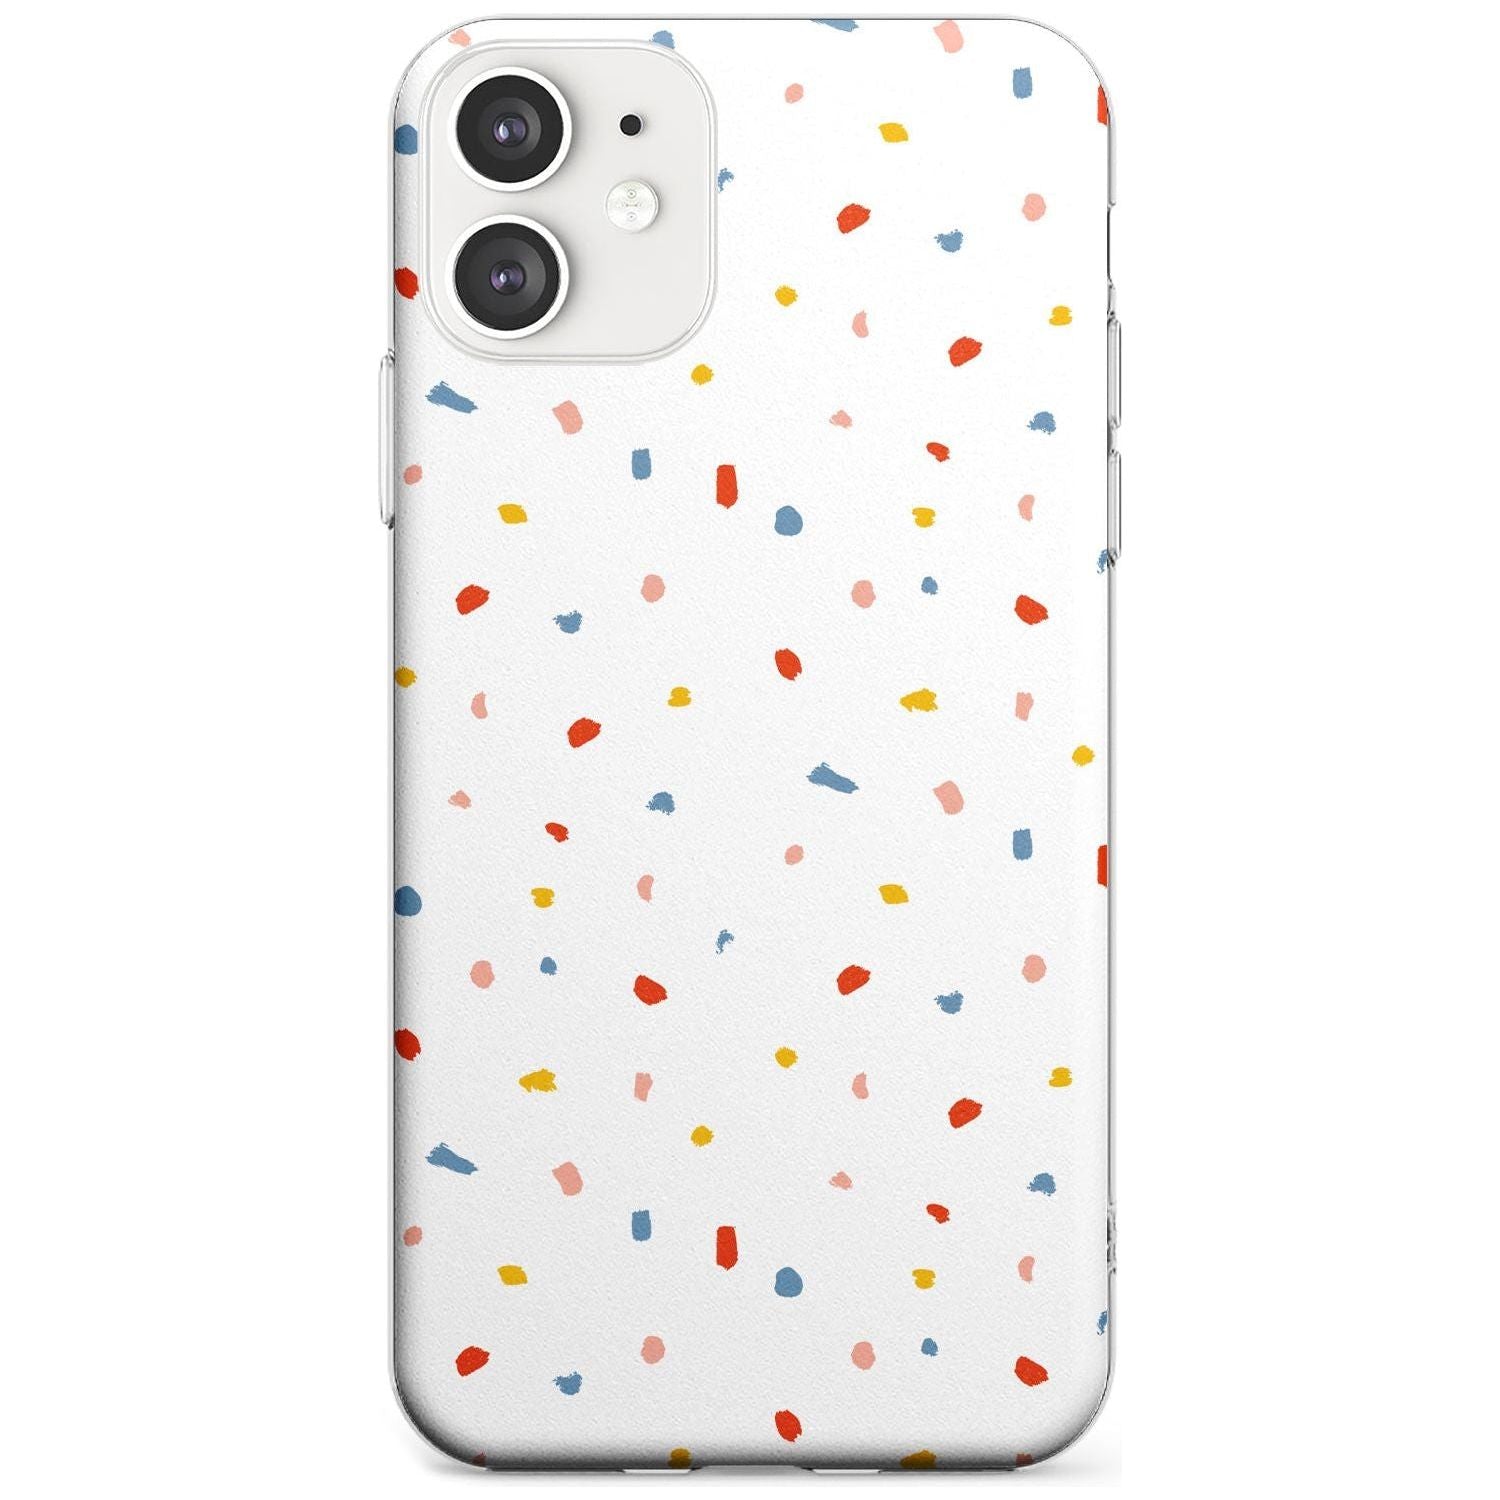 Confetti Print on Solid White Slim TPU Phone Case for iPhone 11